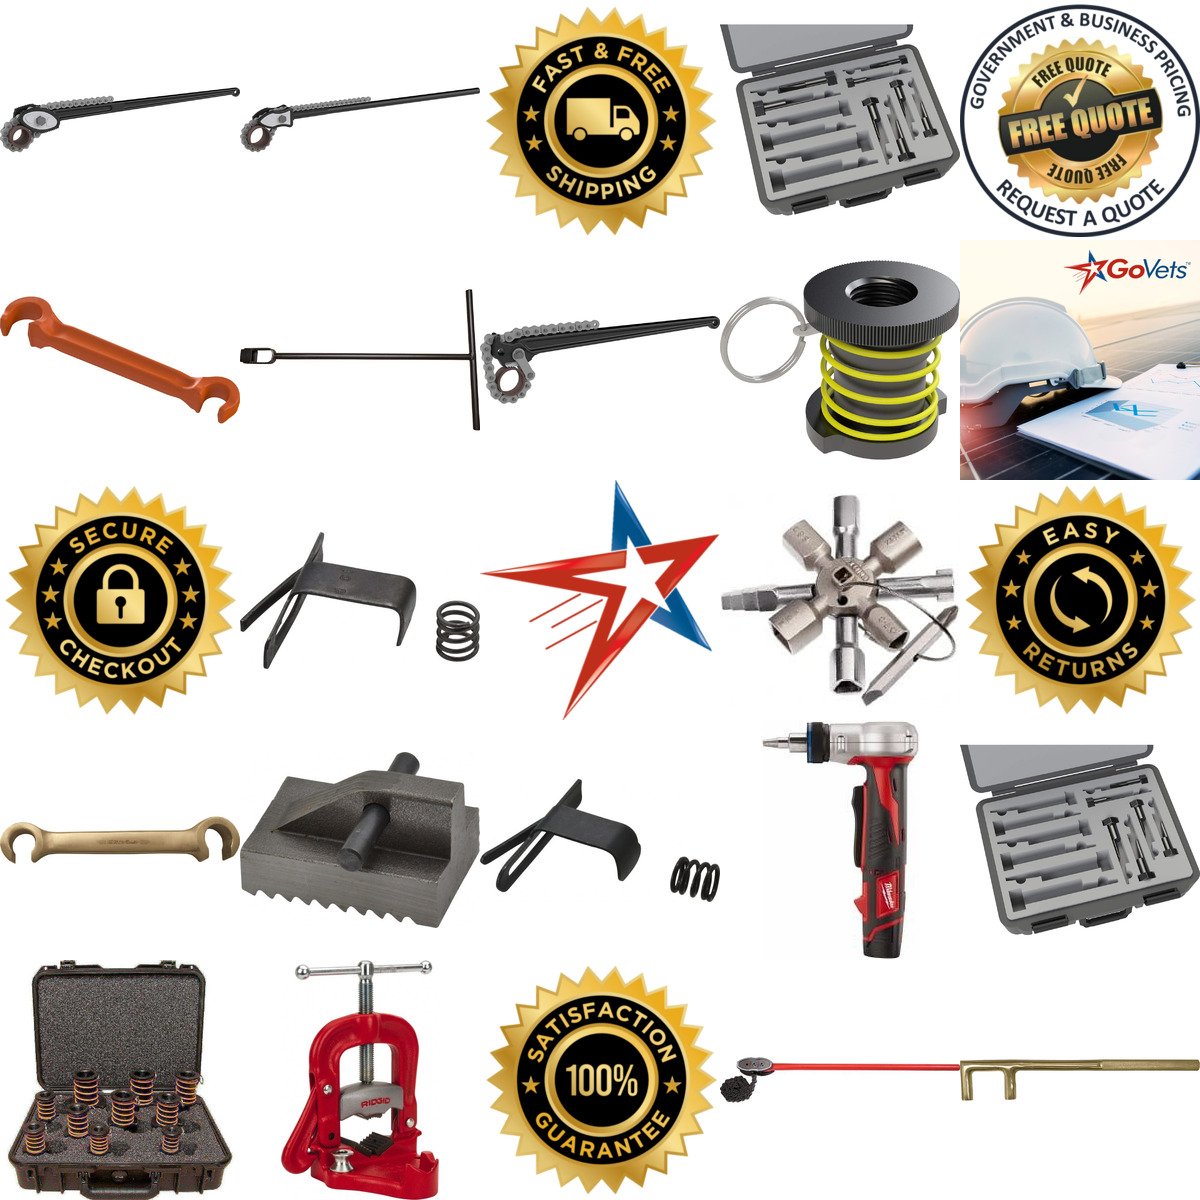 A selection of Wrenches Stands and Plumbing Specialty Tools products on GoVets